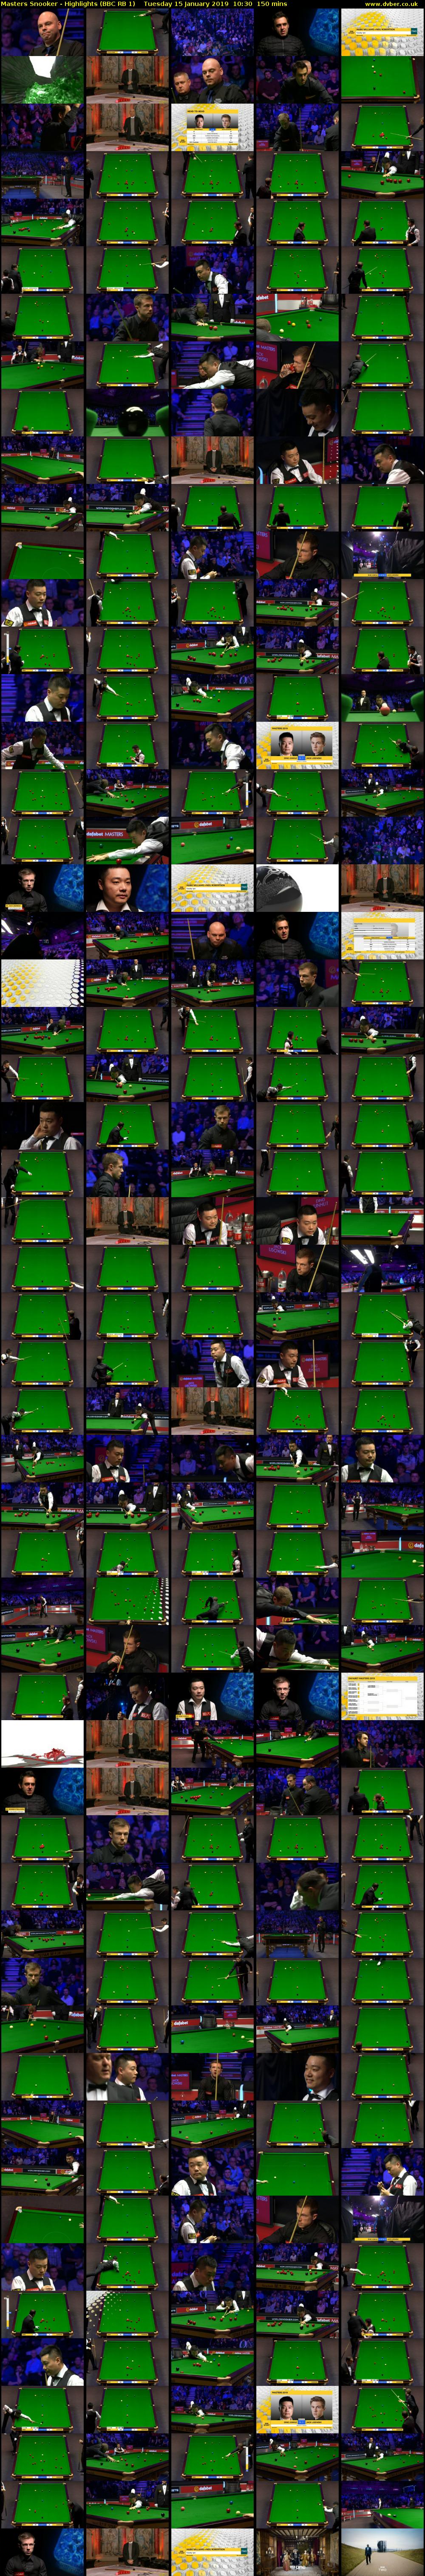 Masters Snooker - Highlights (BBC RB 1) Tuesday 15 January 2019 10:30 - 13:00